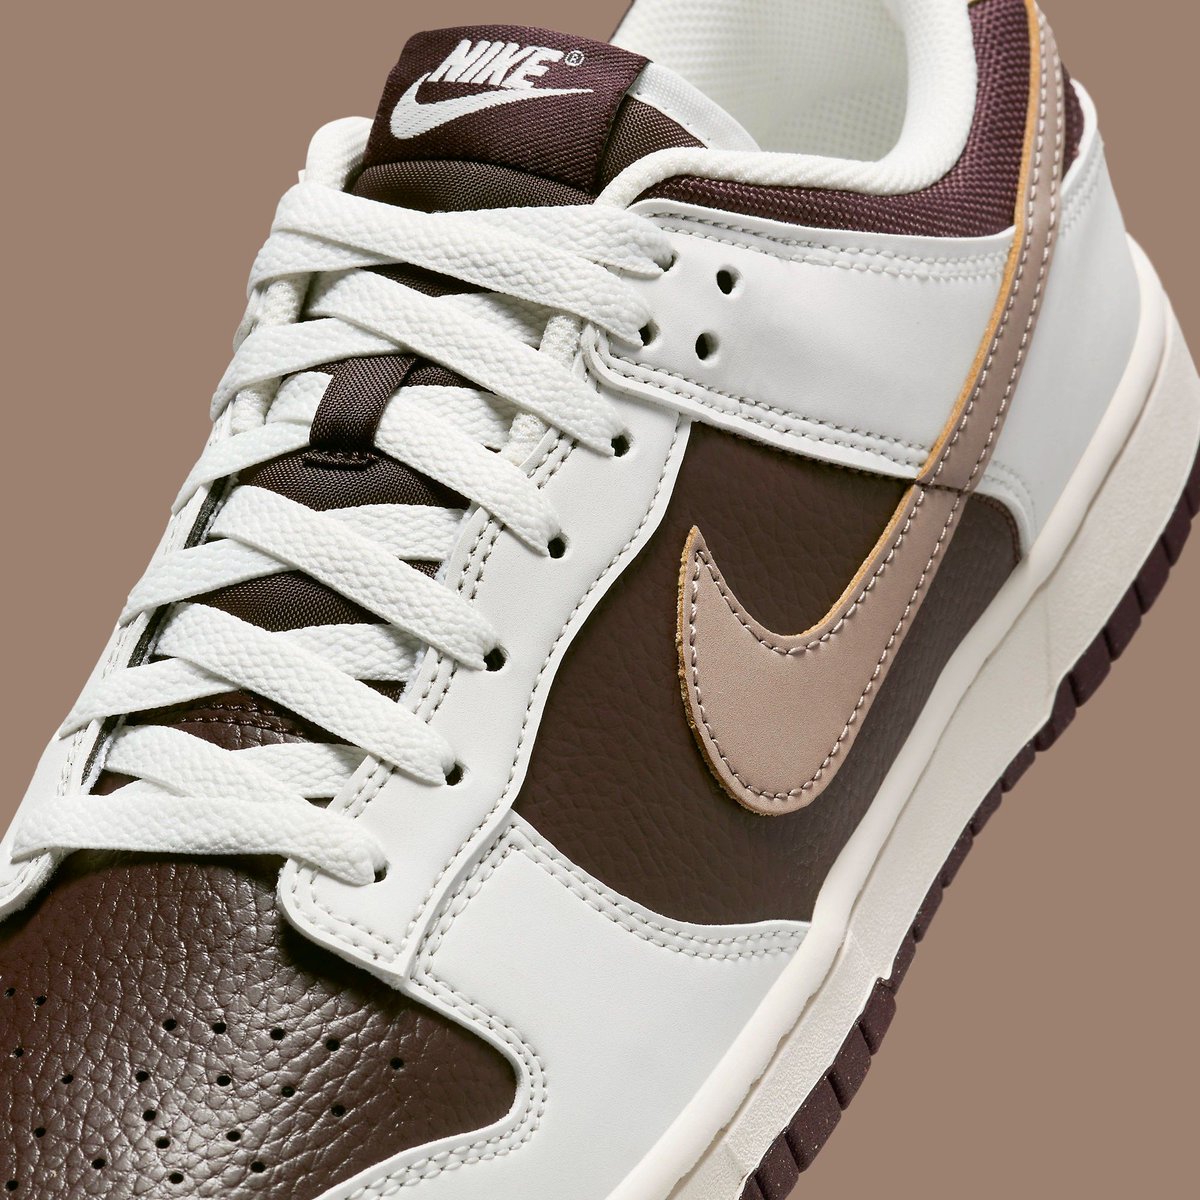 Official Look at the Nike Dunk Low Next Nature 'Mocha' ☕ bit.ly/442Nfu6